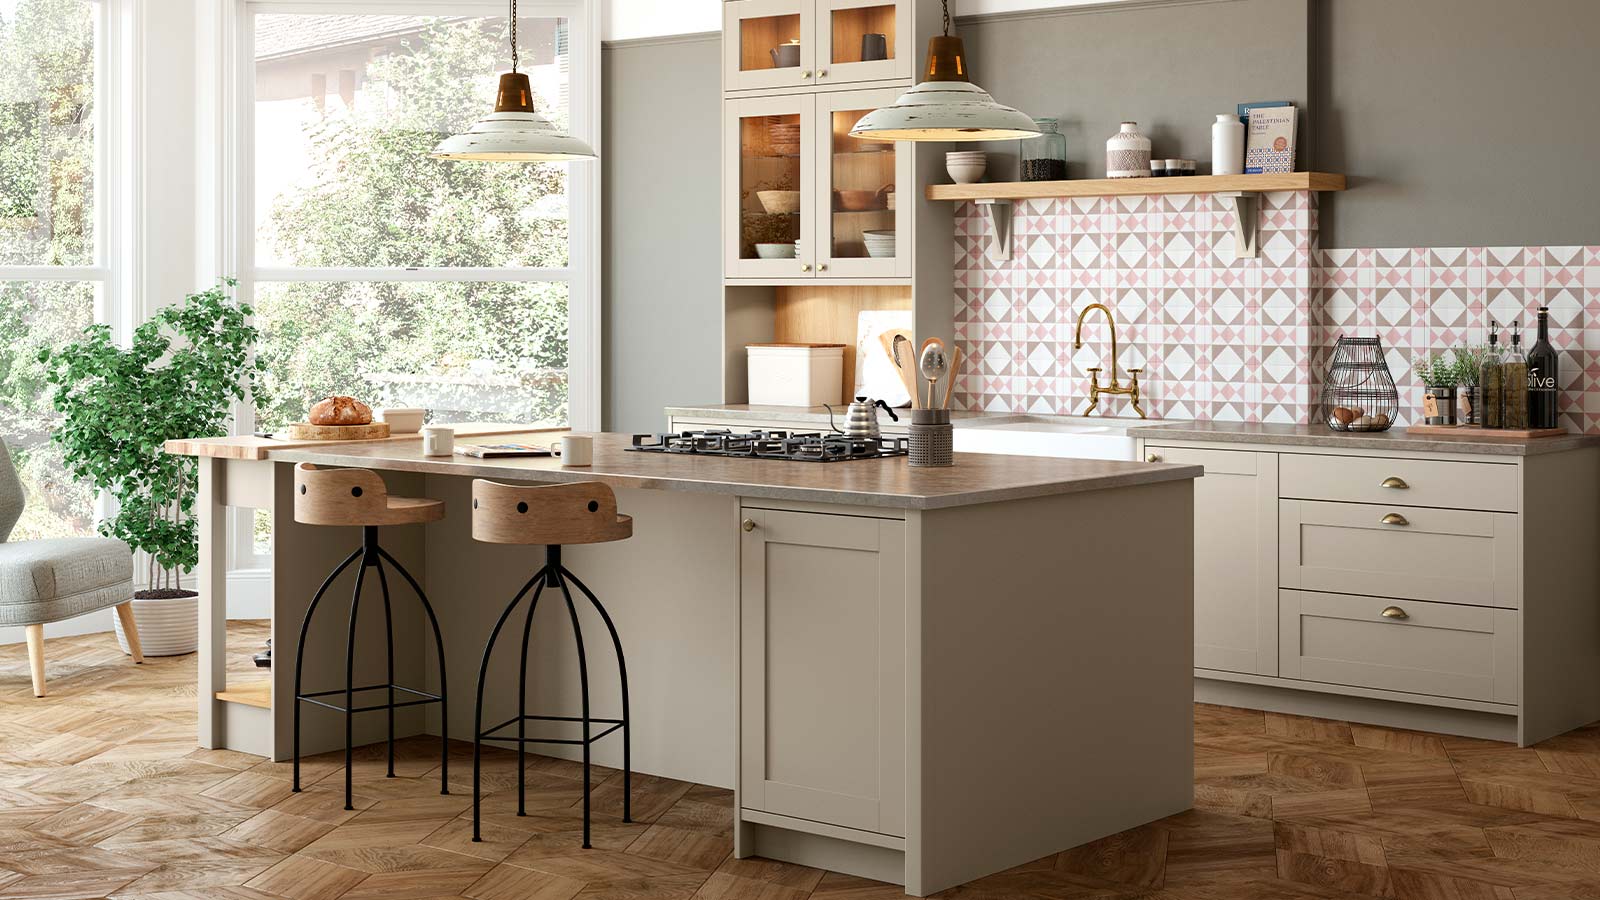 KBBFocus - Six beautiful kitchen design trends to keep your eye on in 2021